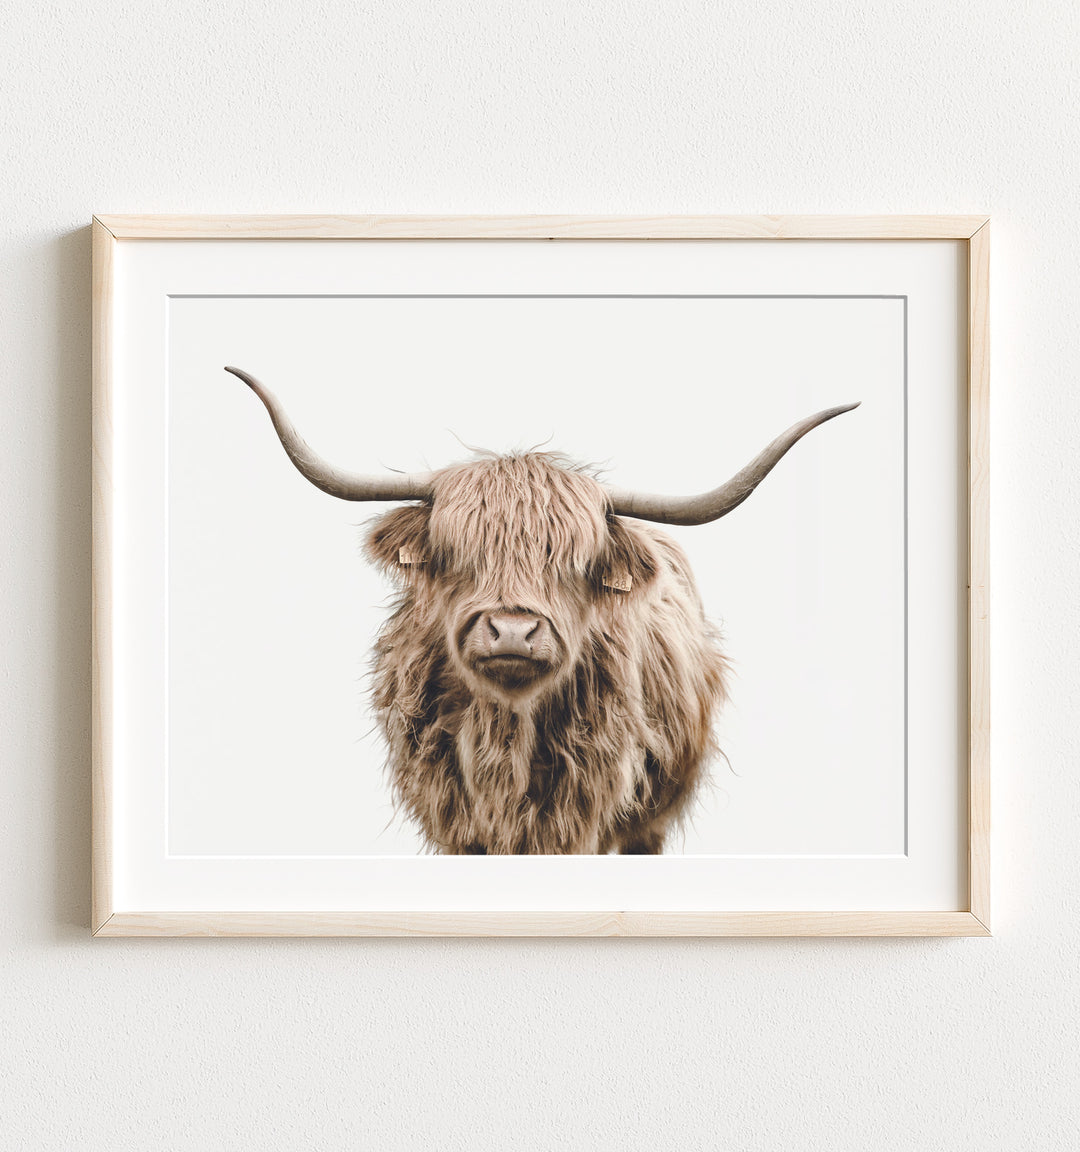 Baby Highland Cow - The Crown Prints